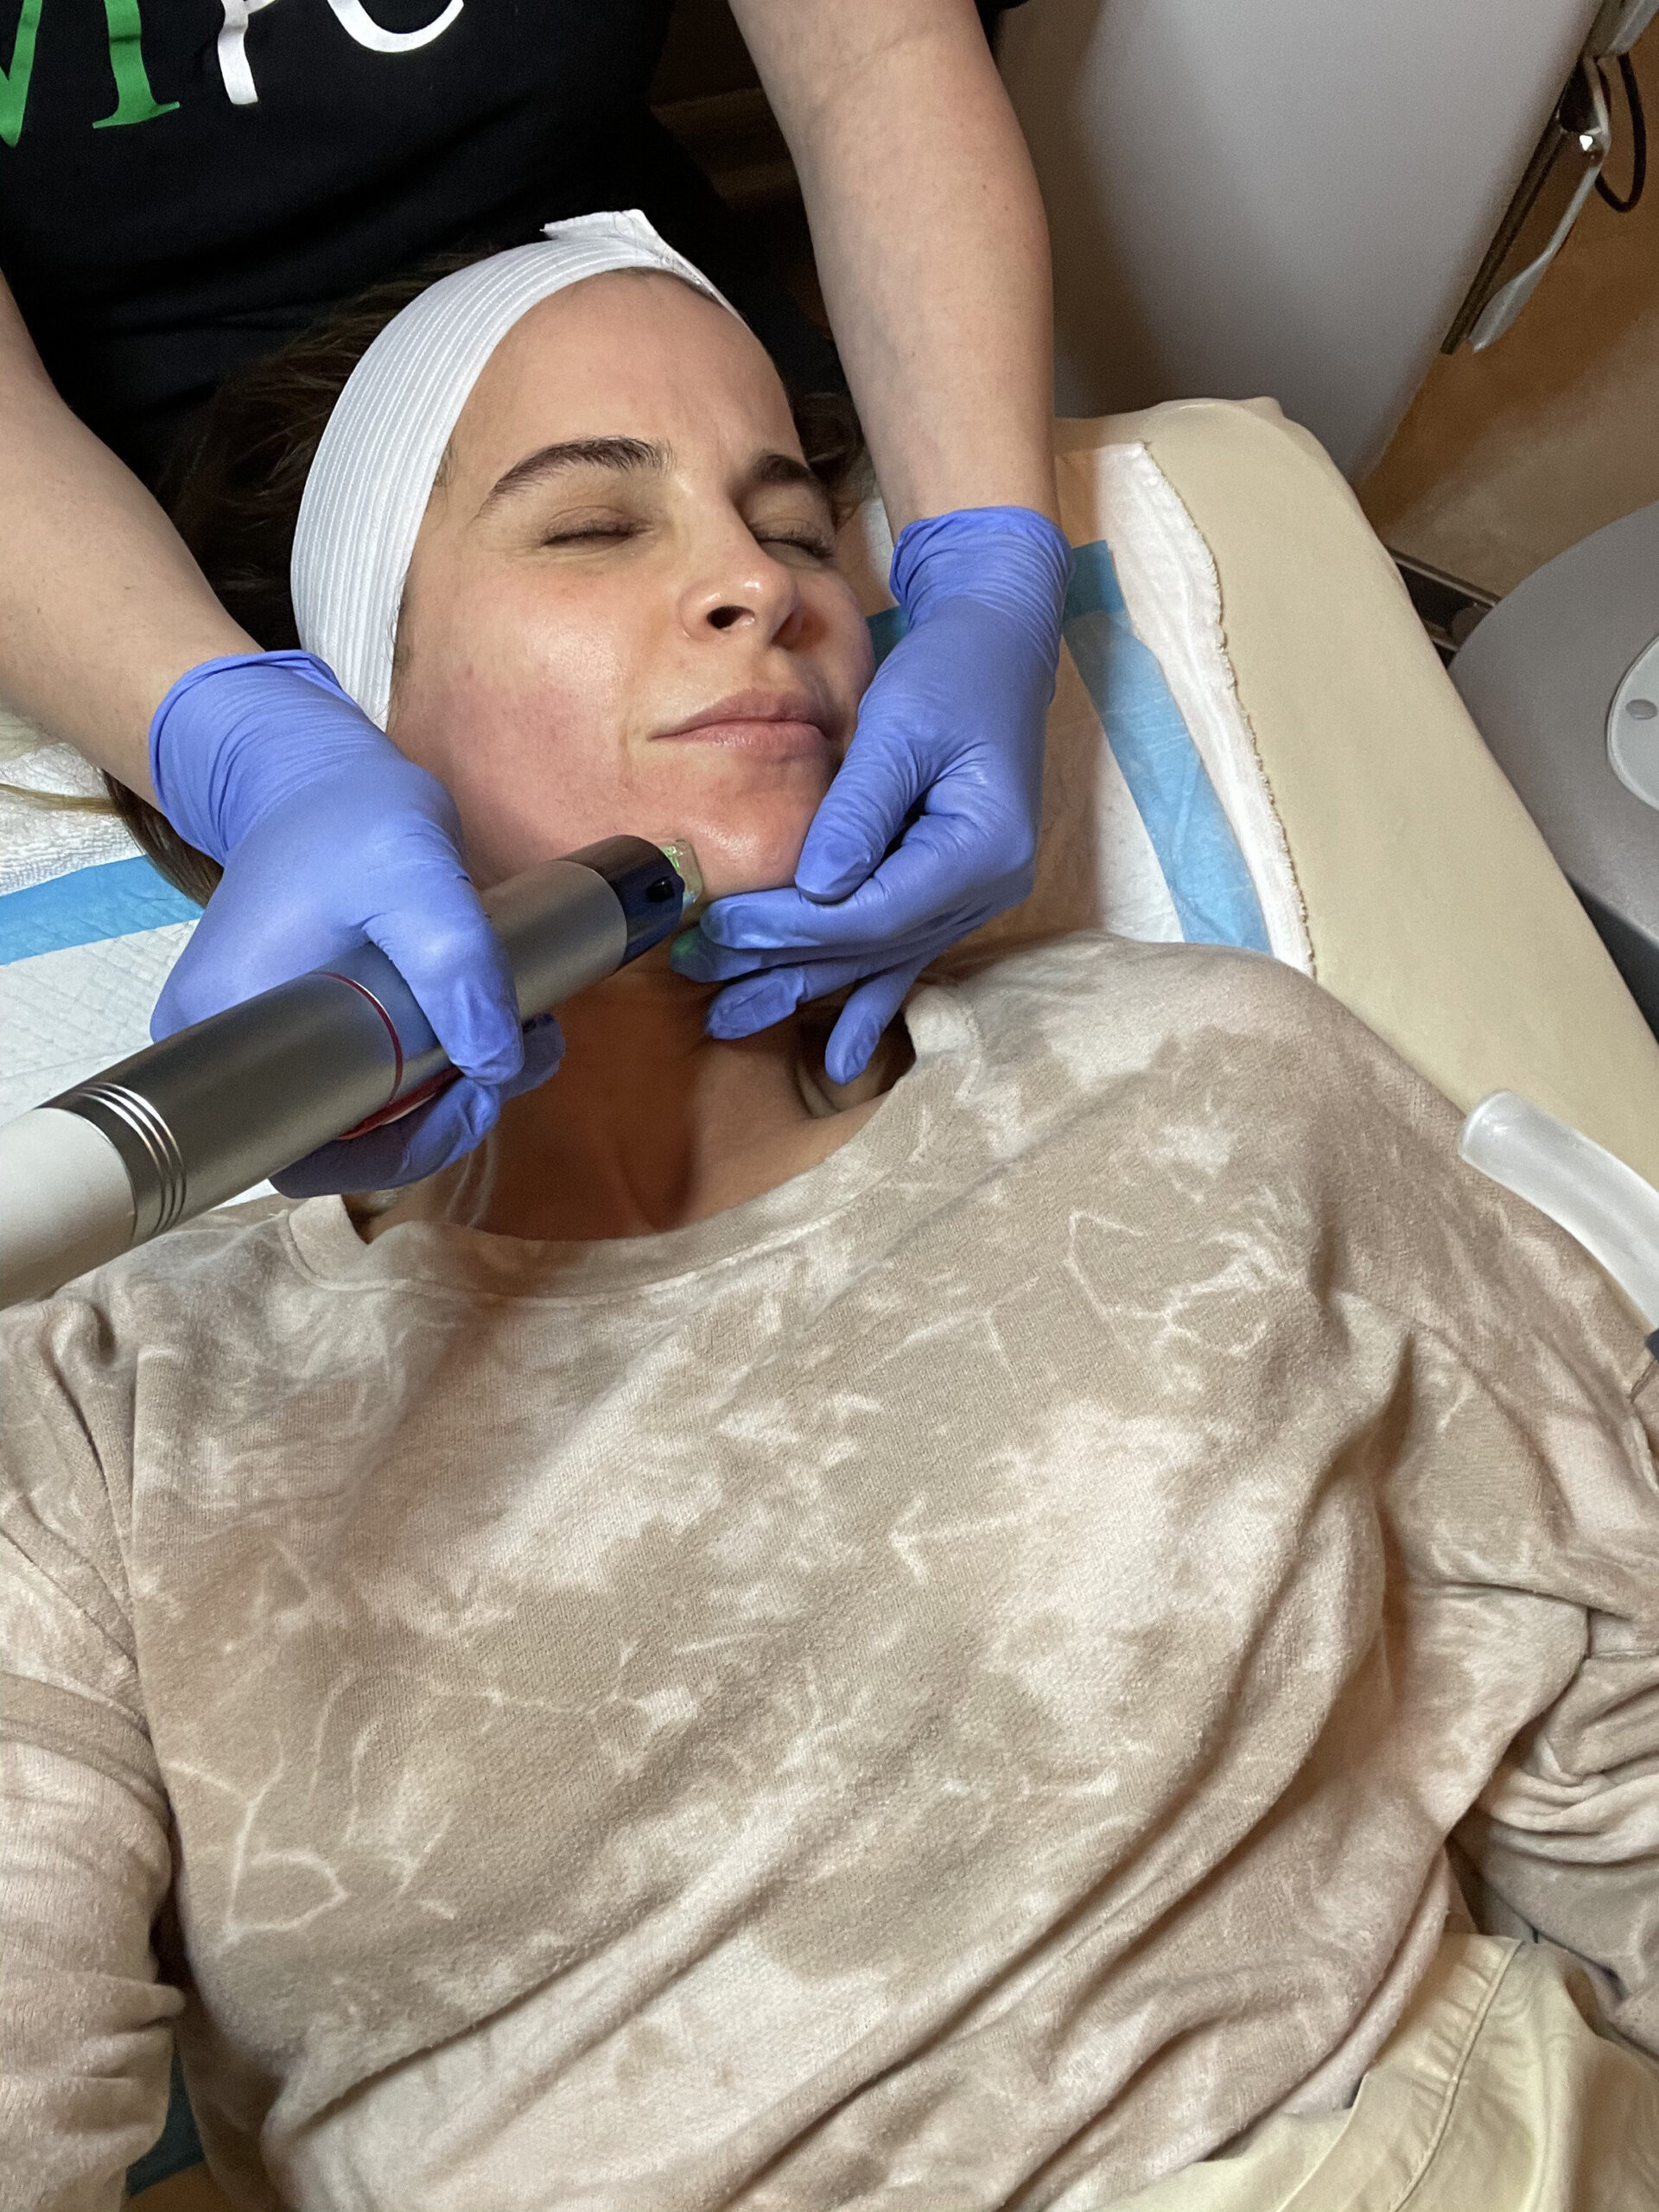 In the middle of the RF microneedling process. The expression is genuine.